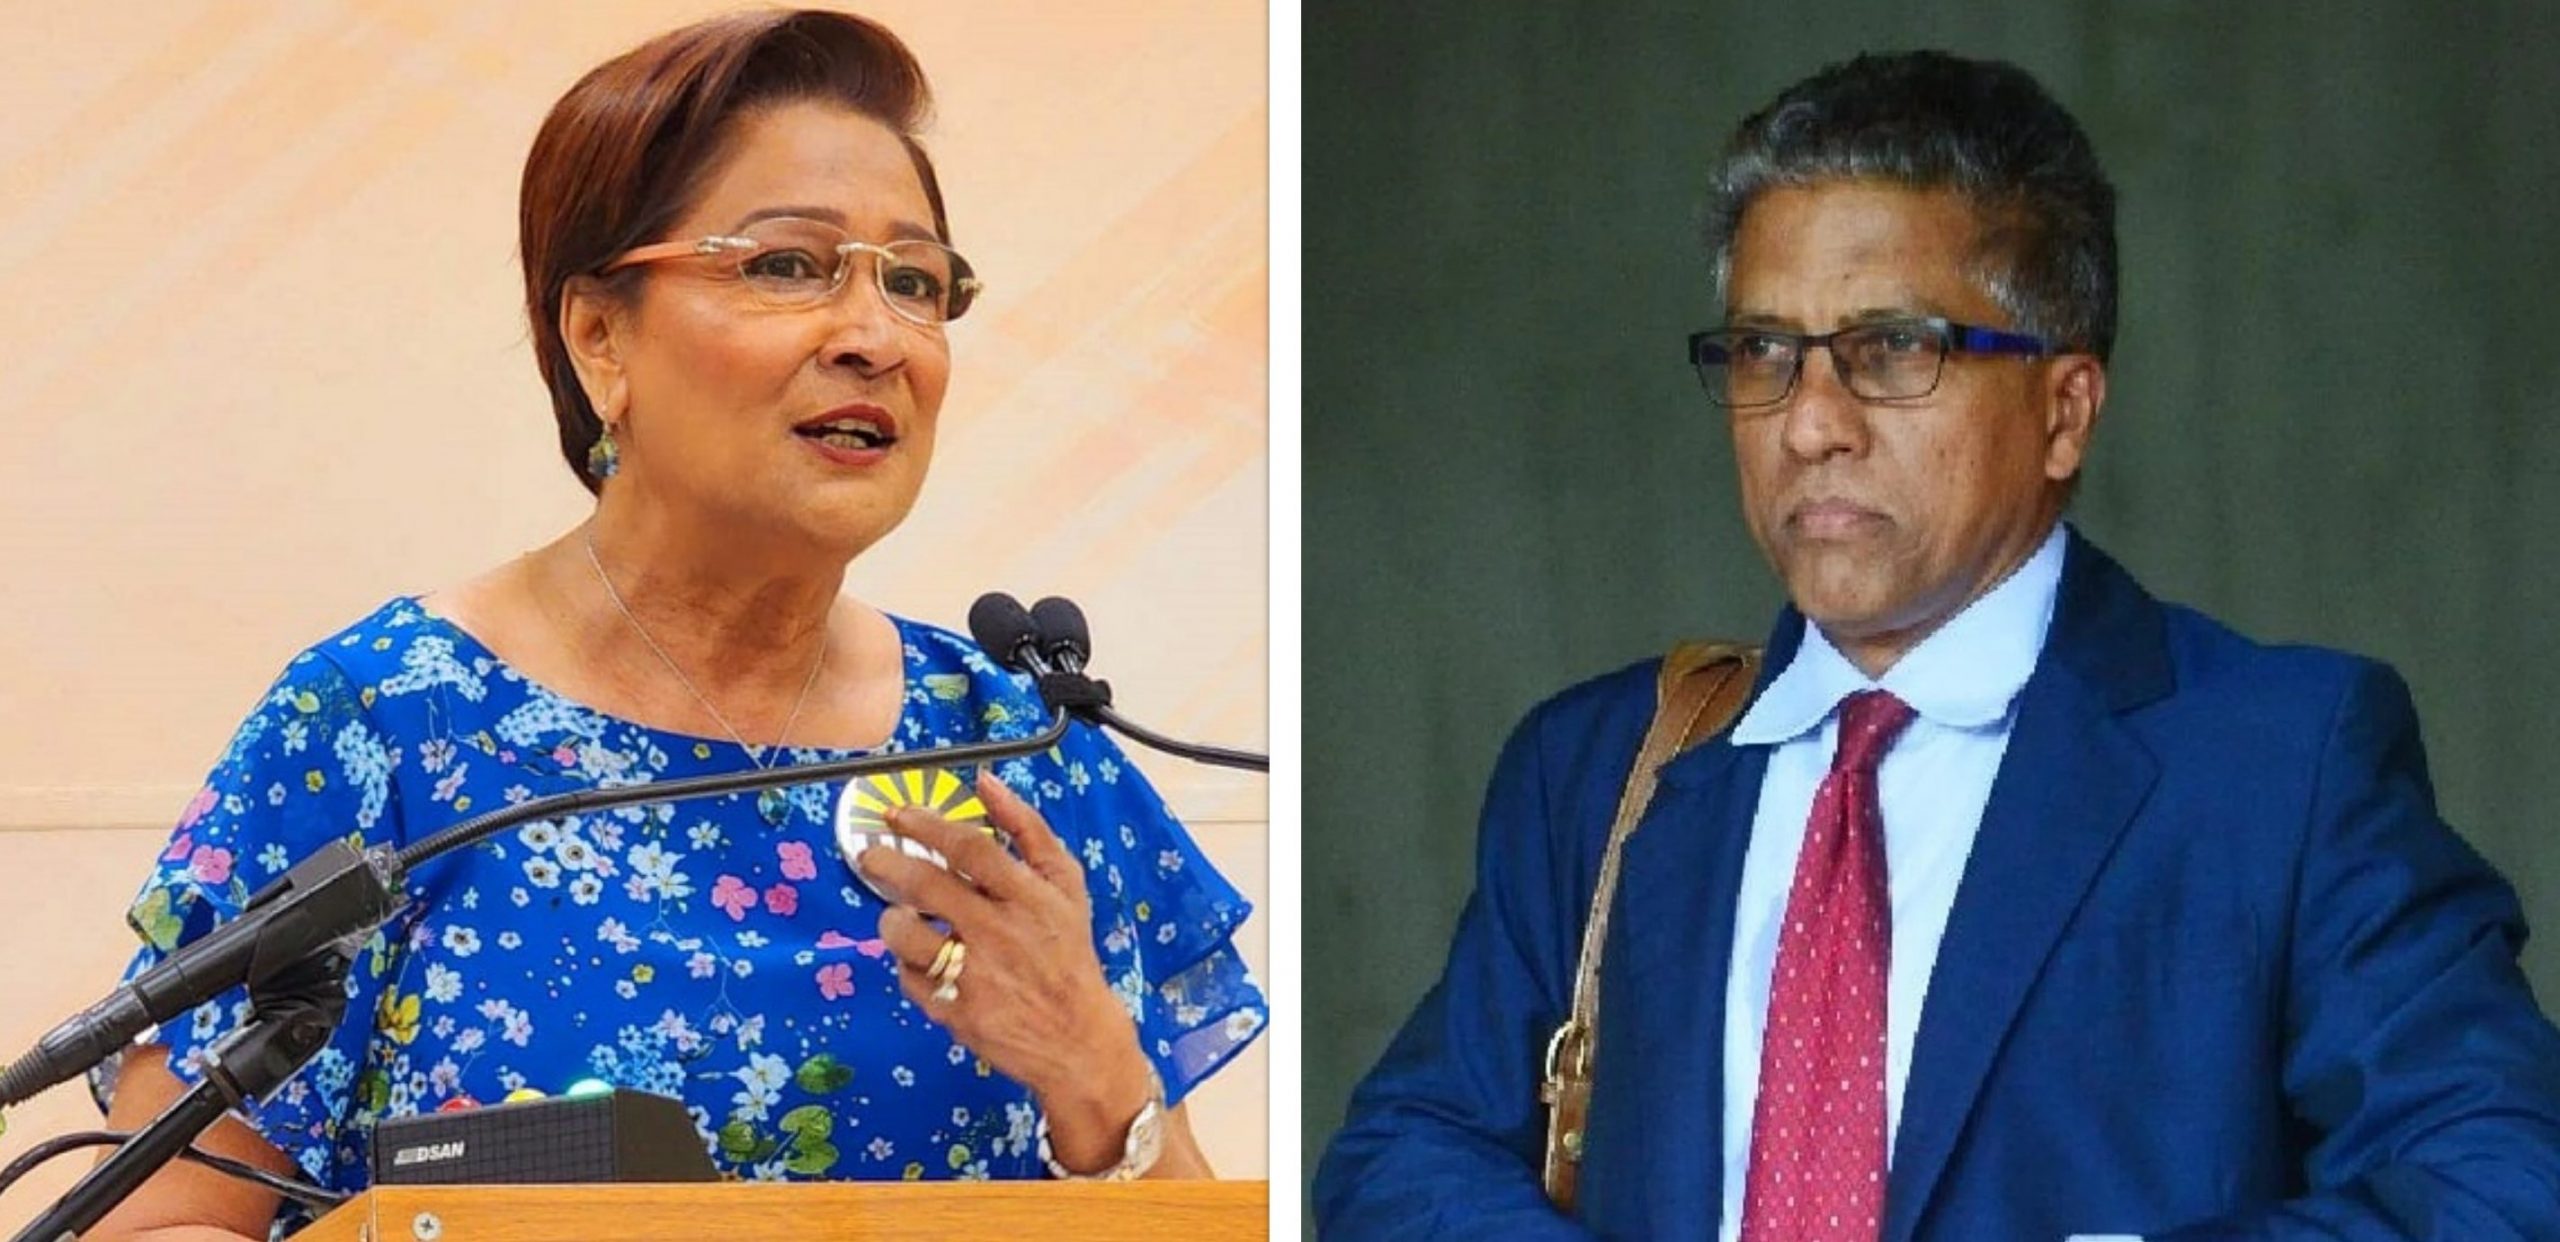 Kamla: Armour’s latest incompetence and stupidity to cost taxpayers almost $64M